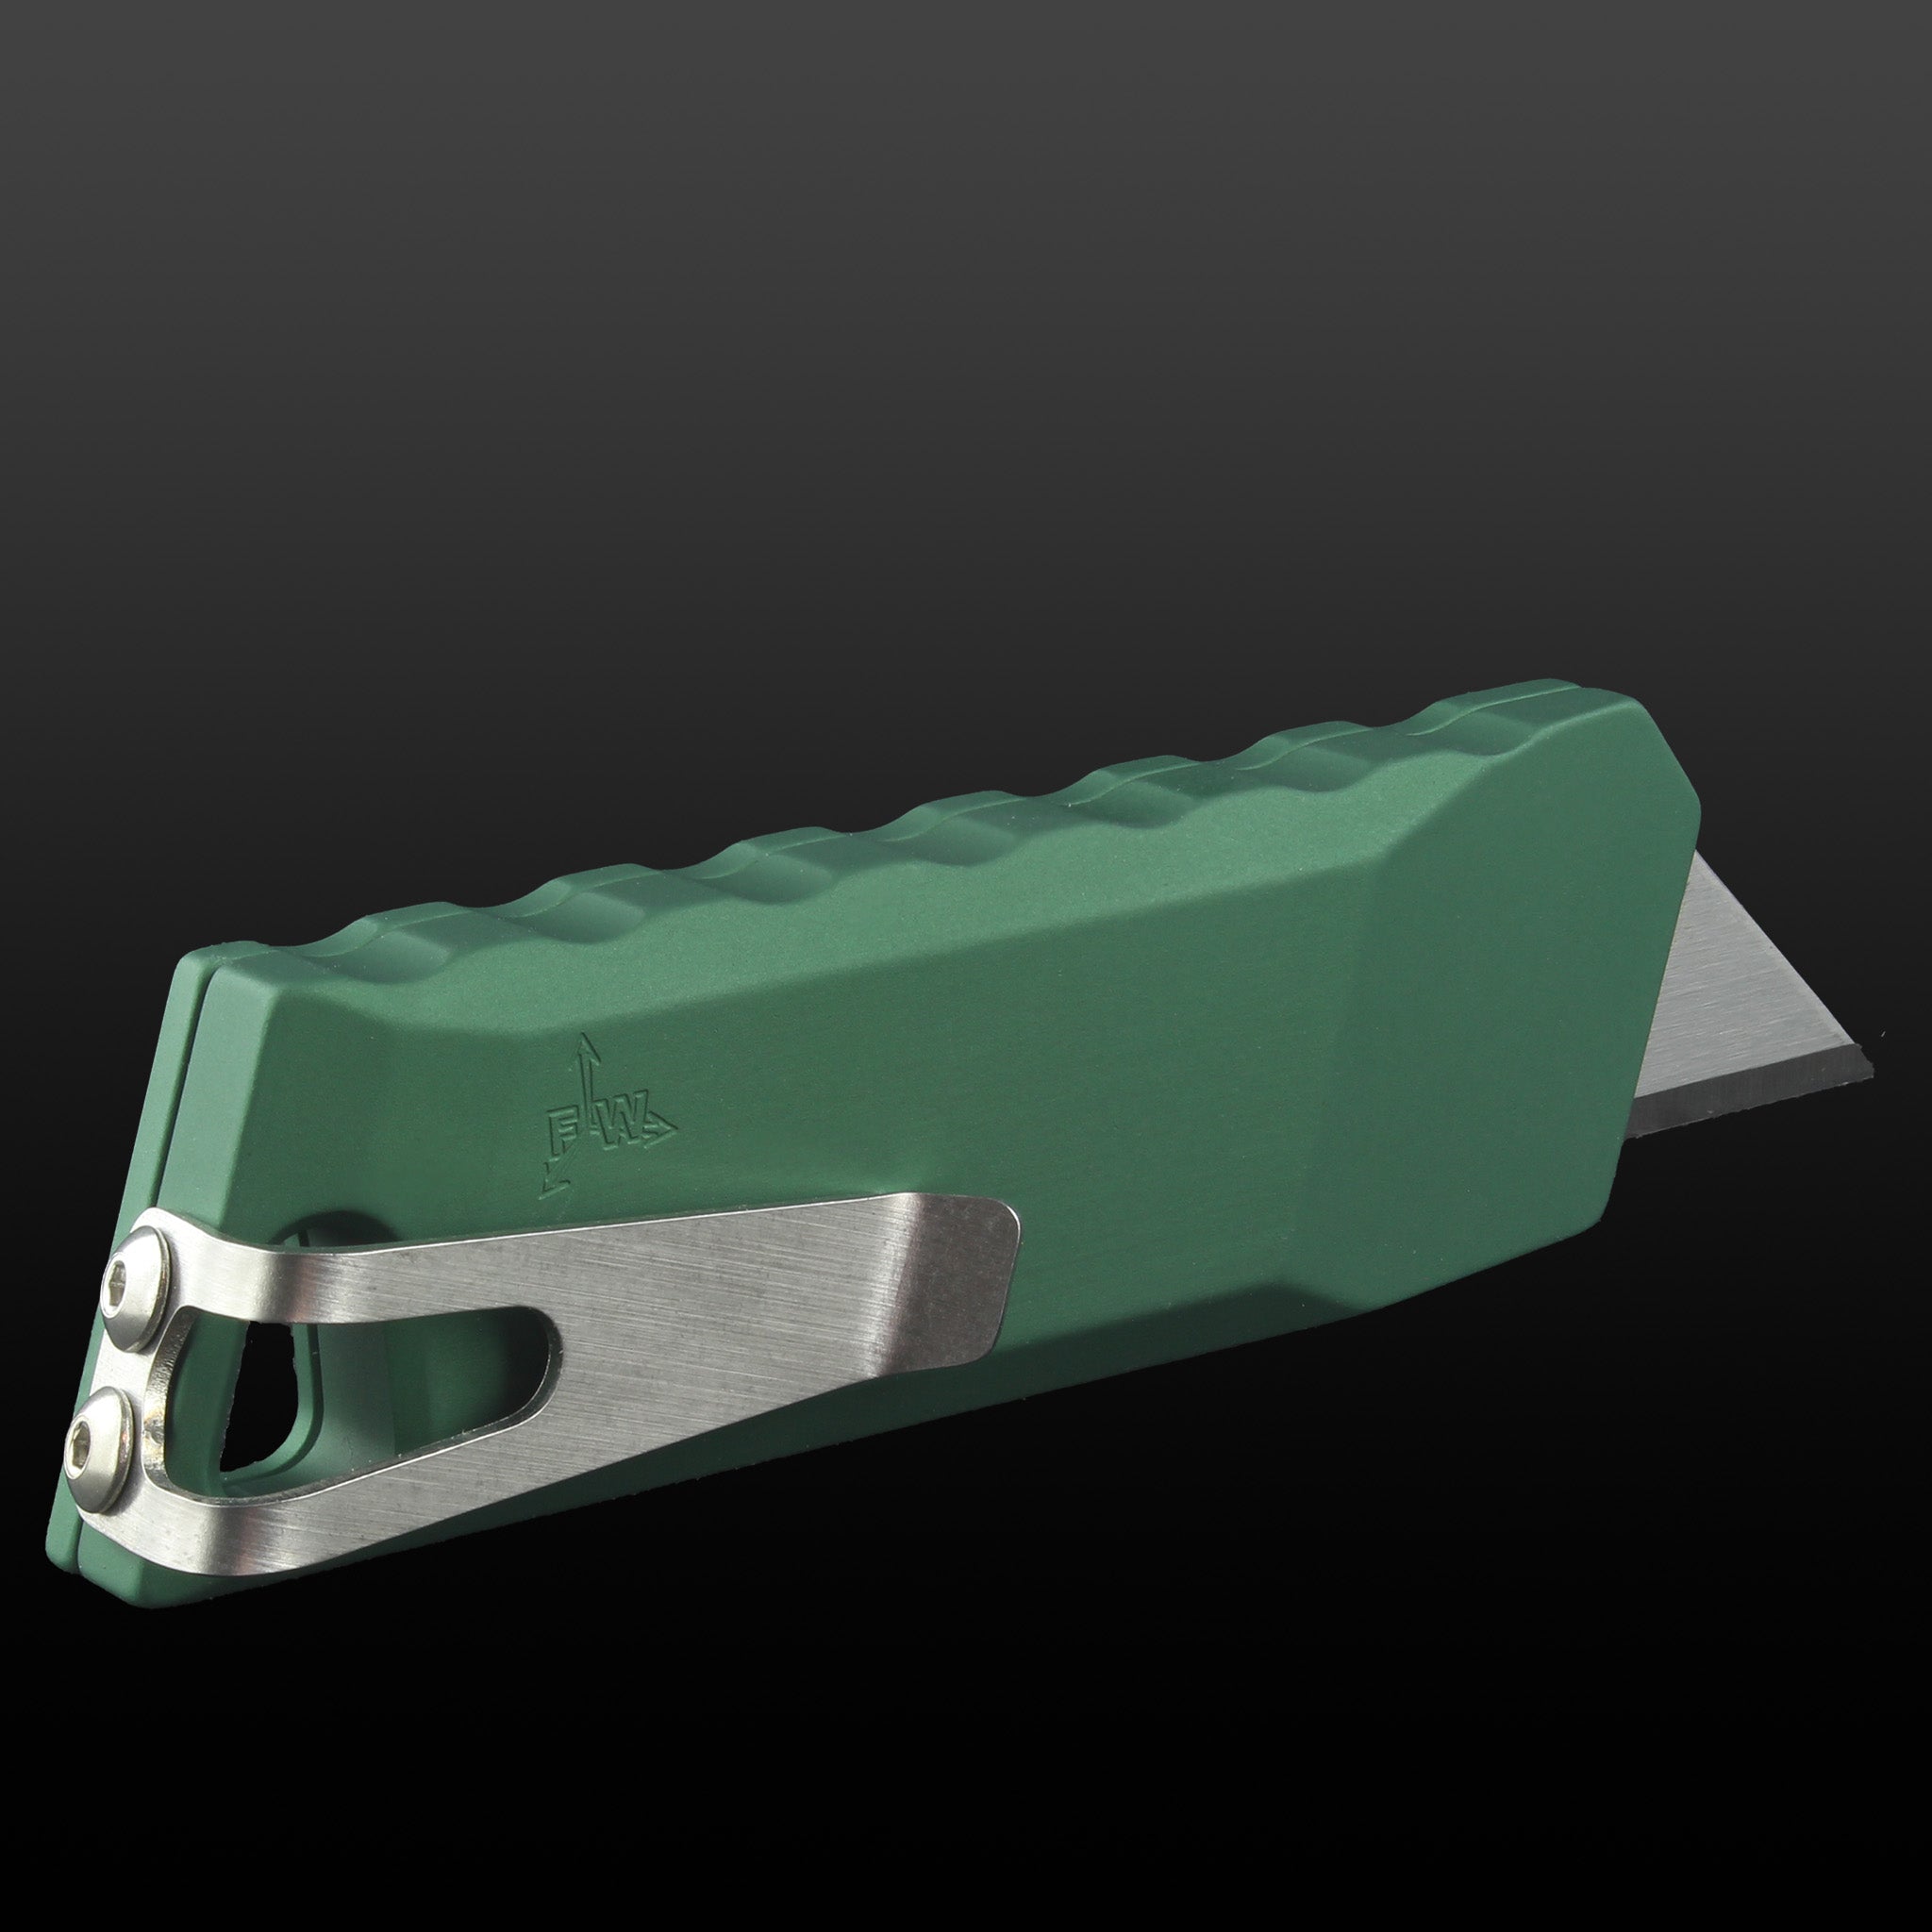 the back of the Jade Green boxcutter showing the pocket clip